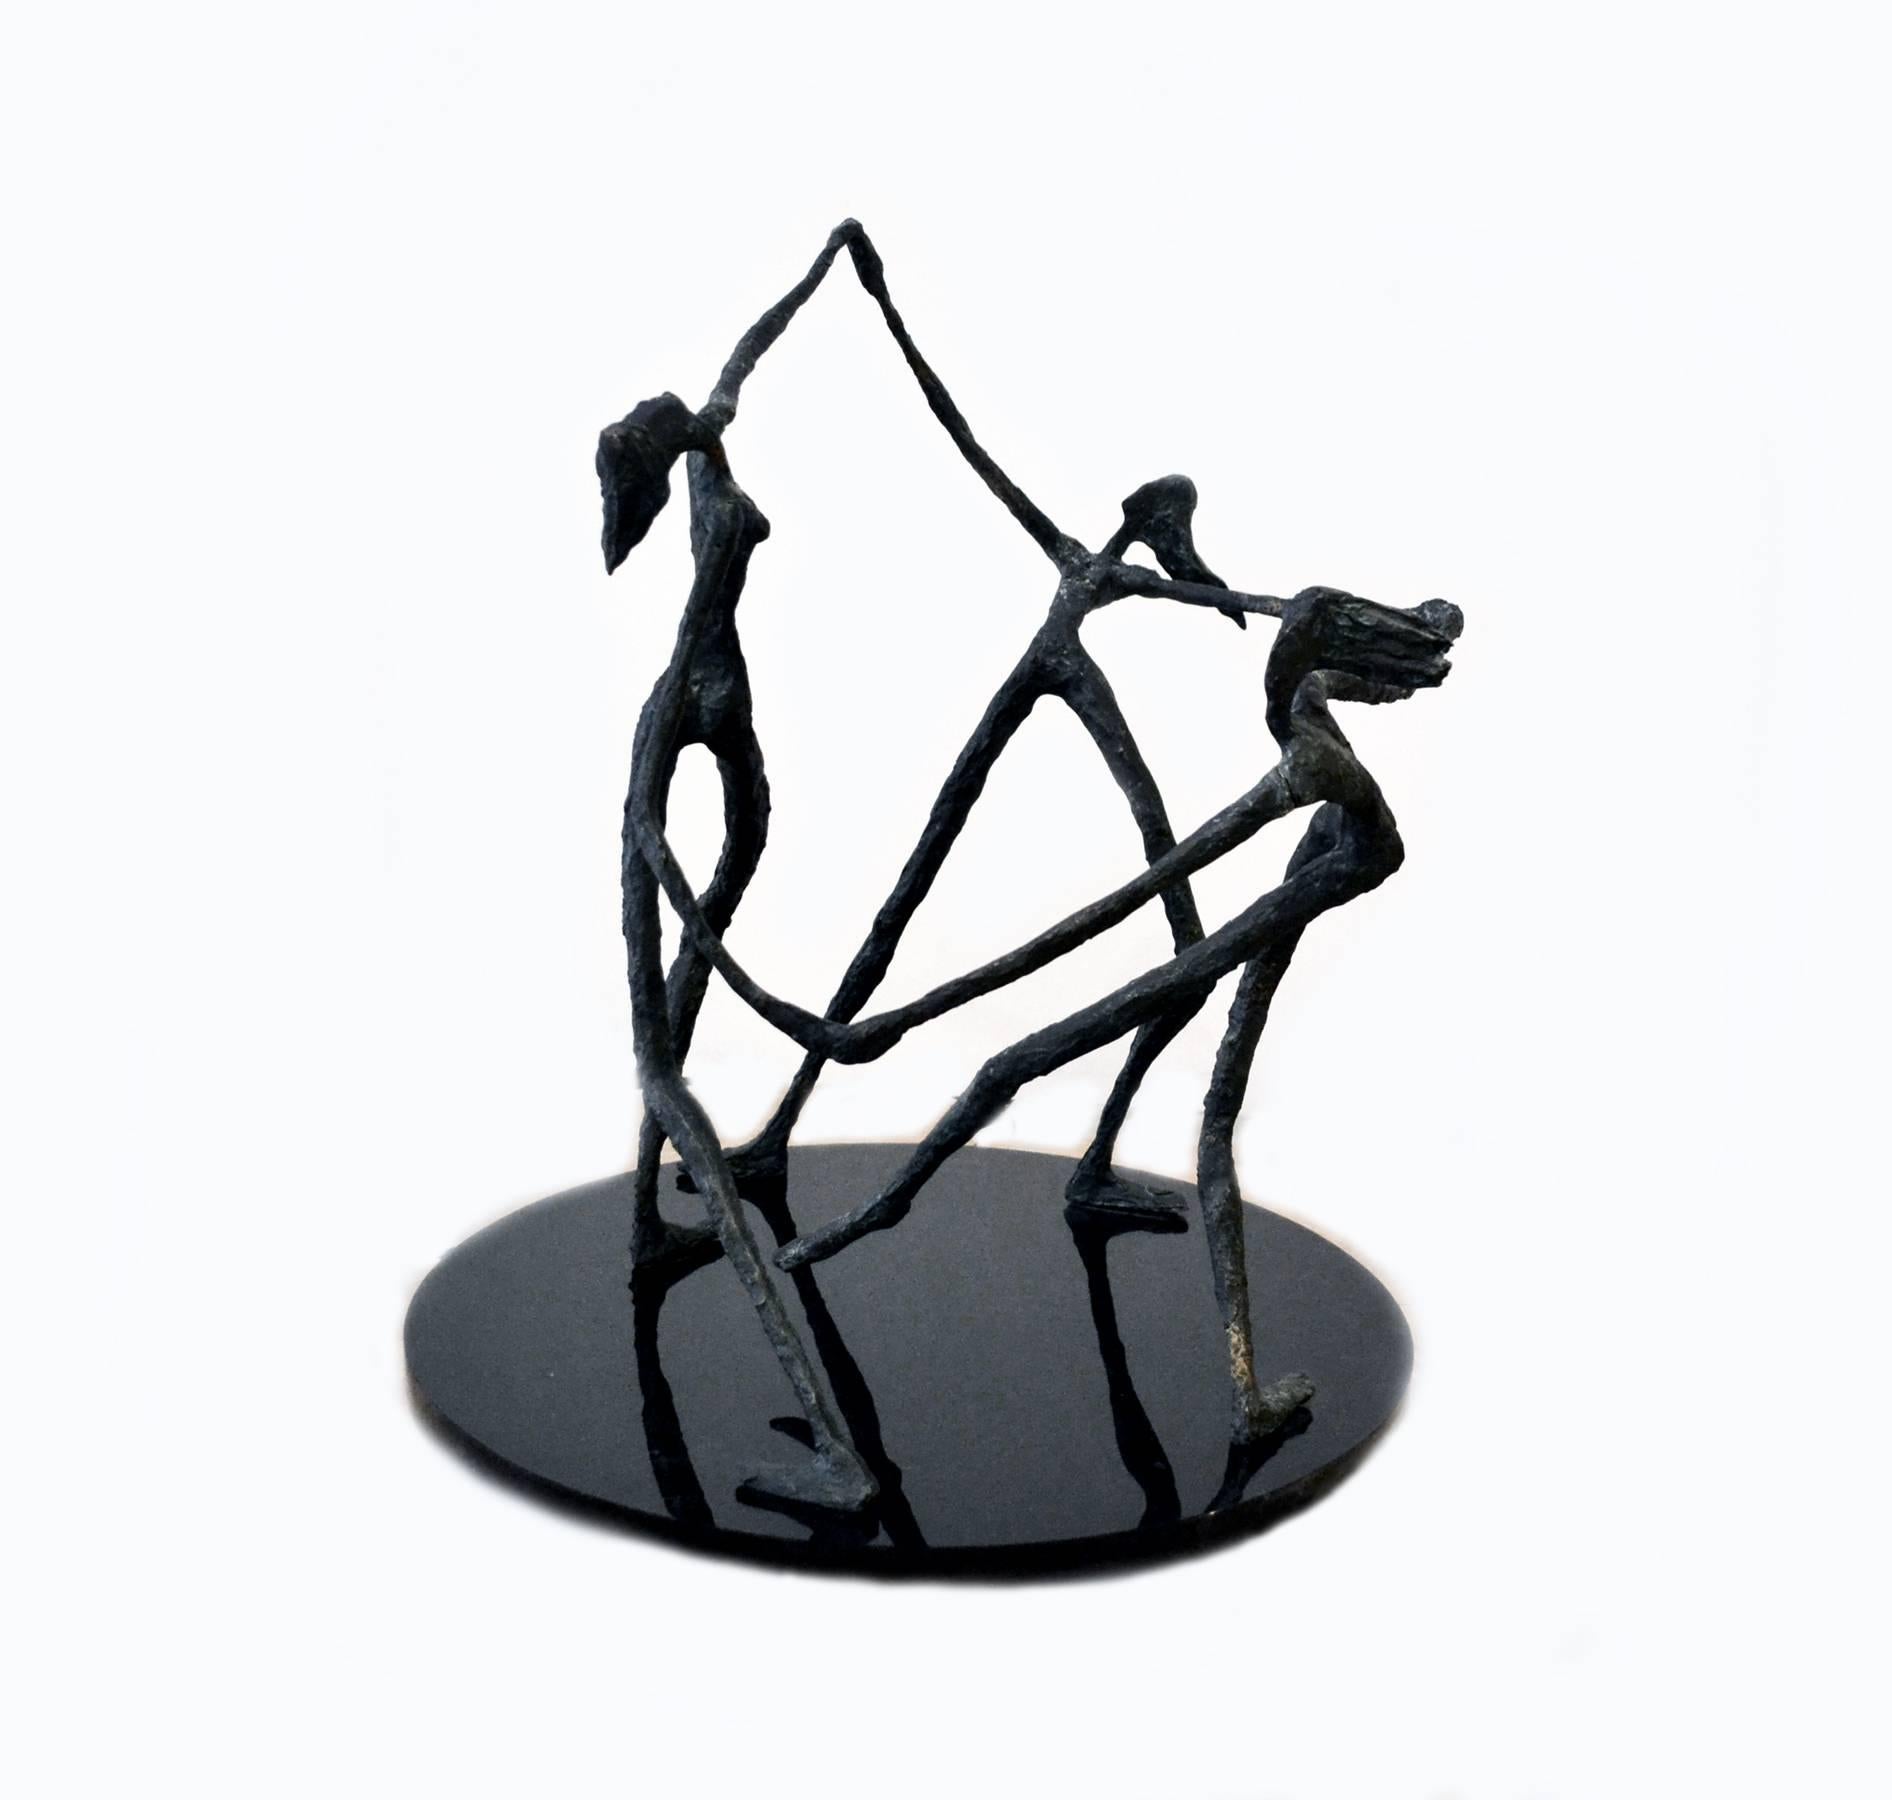 An exquisite vintage abstract bronze sculpture, circa 1940s-1950s, depicting three women dancing in a circle with arms joined, after renowned sculptor Alberto Giacometti. The bronze figures were forged with detail to movement, with hair blowing in